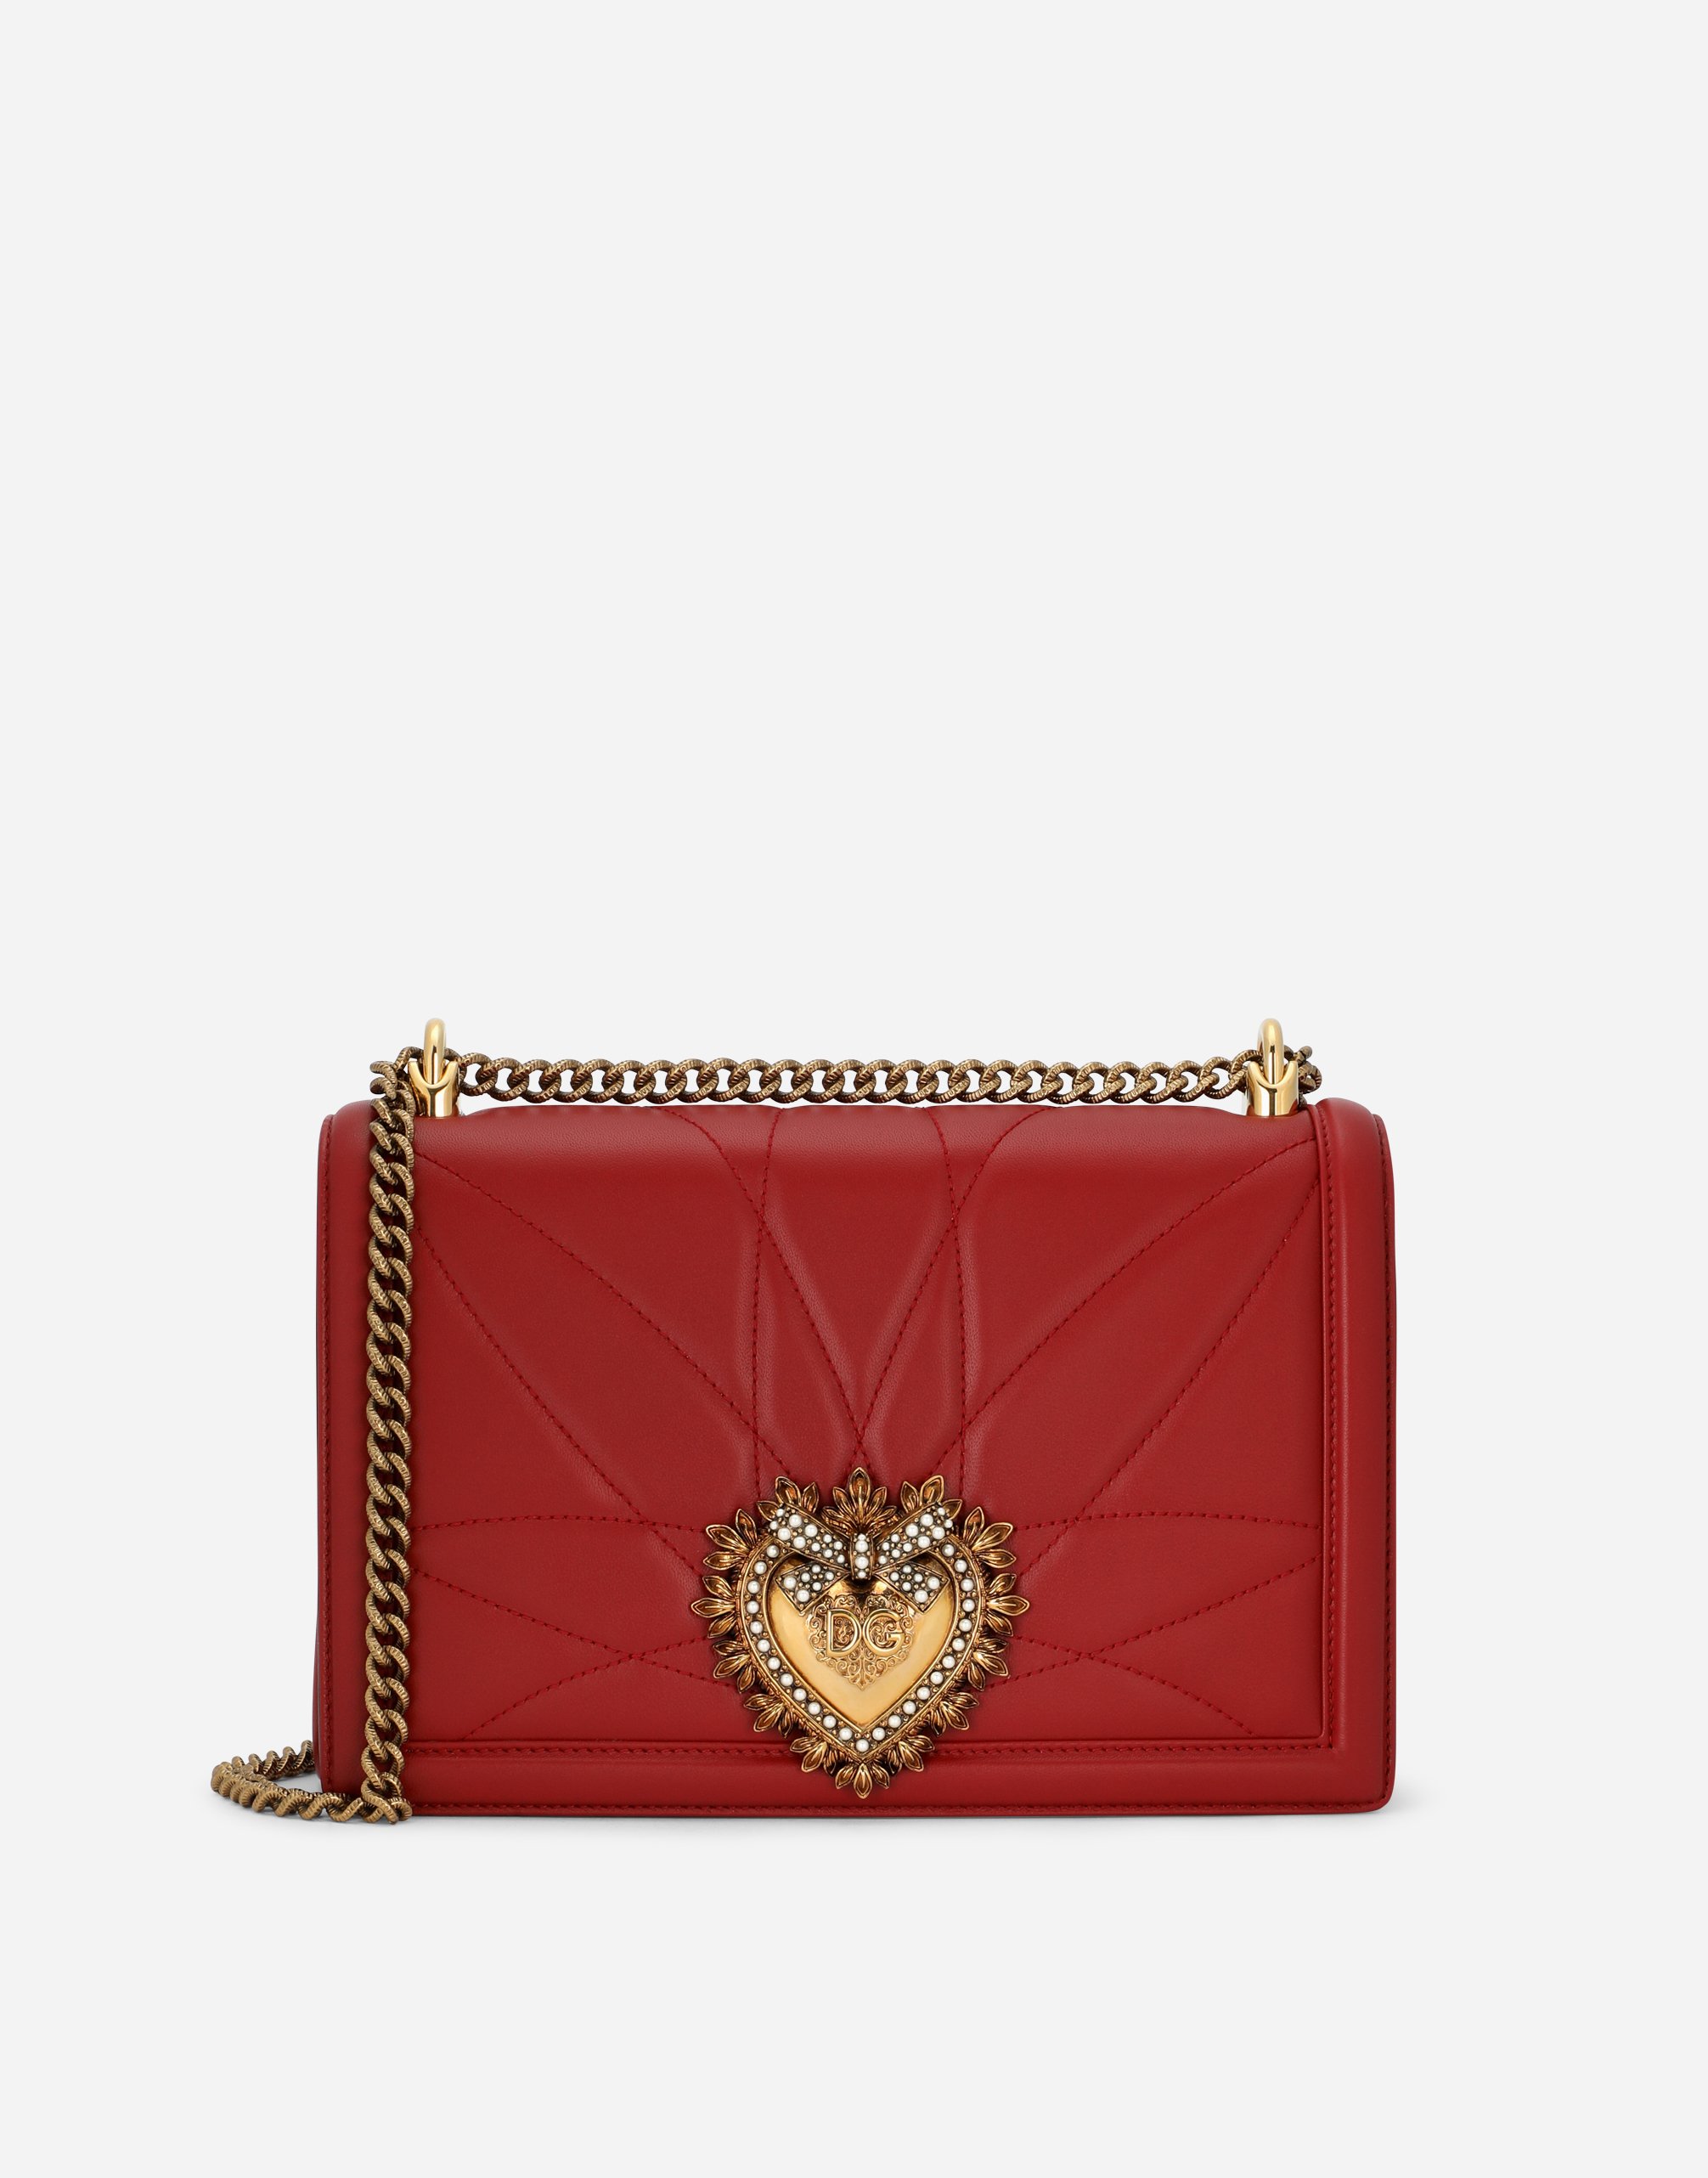 Dolce & Gabbana Large Devotion Bag In Quilted Nappa Leather In Red